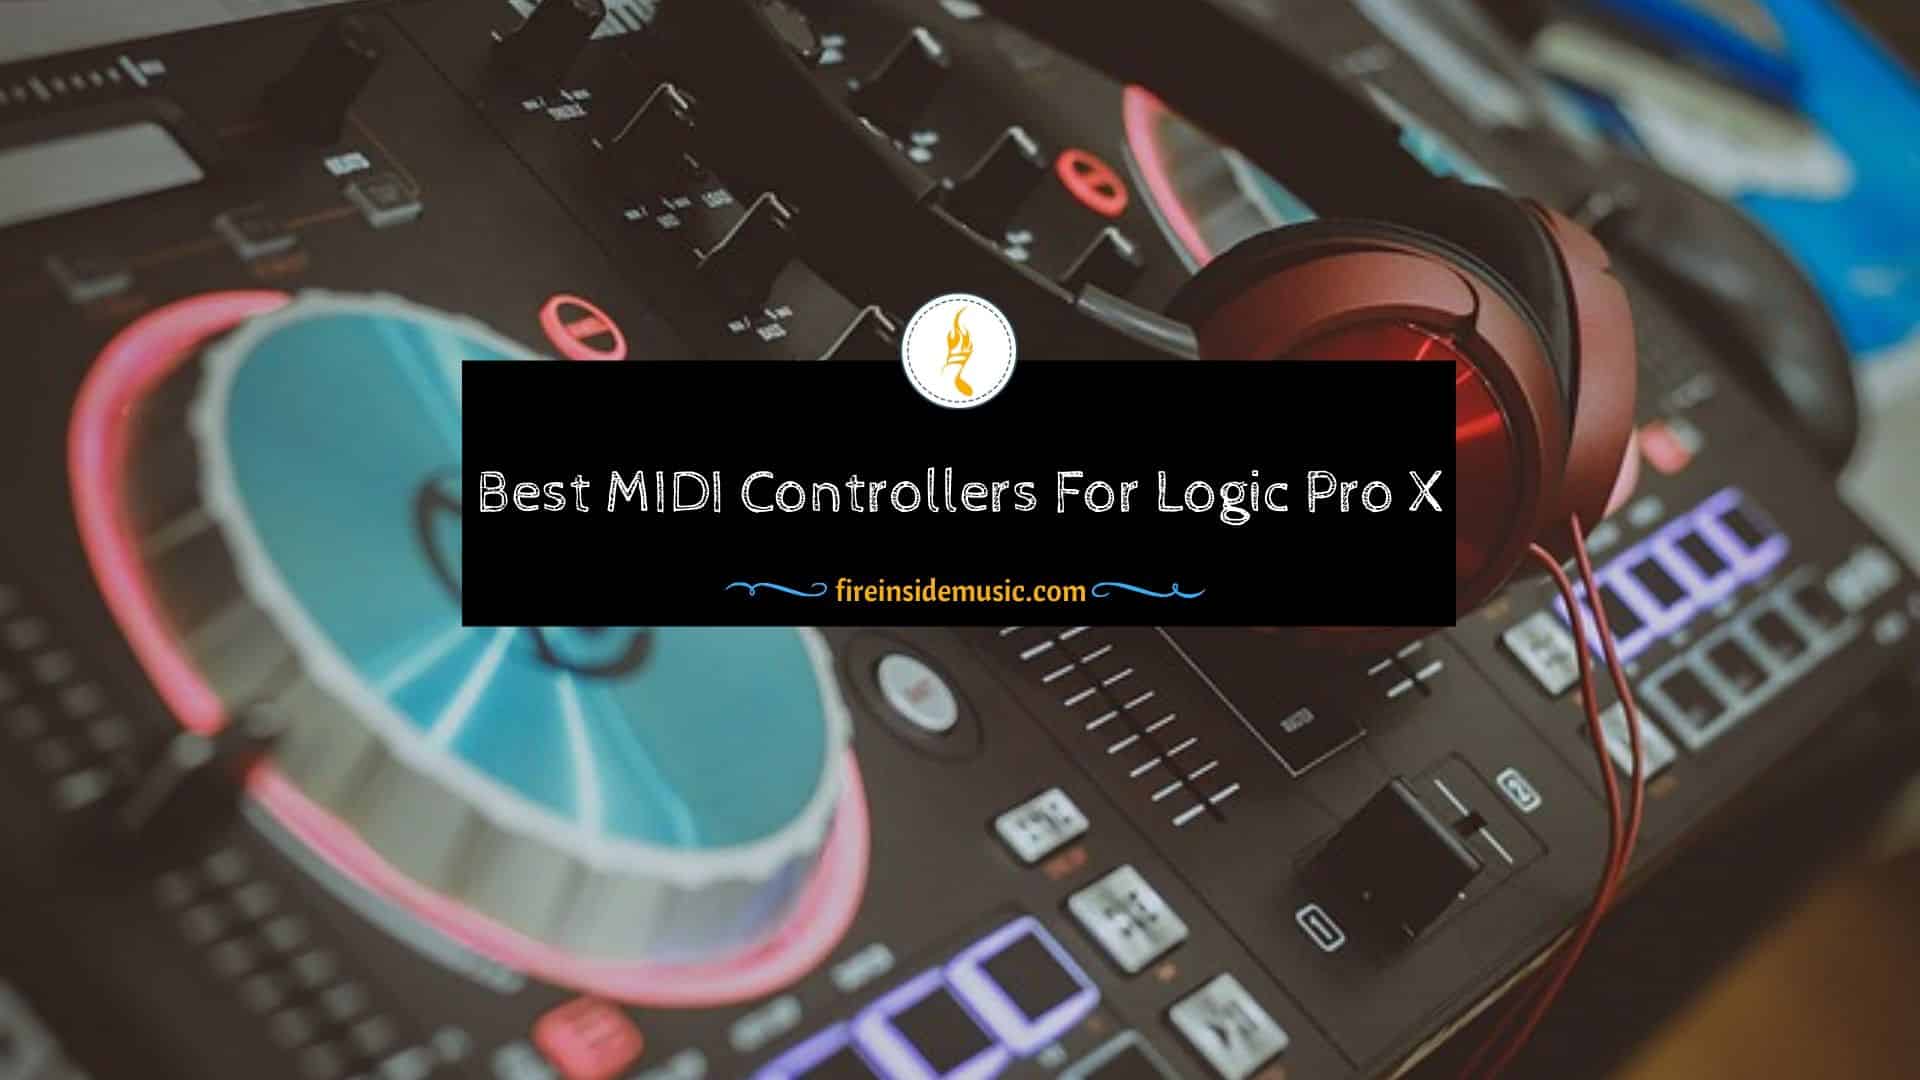 Best MIDI Controllers For Logic Pro X